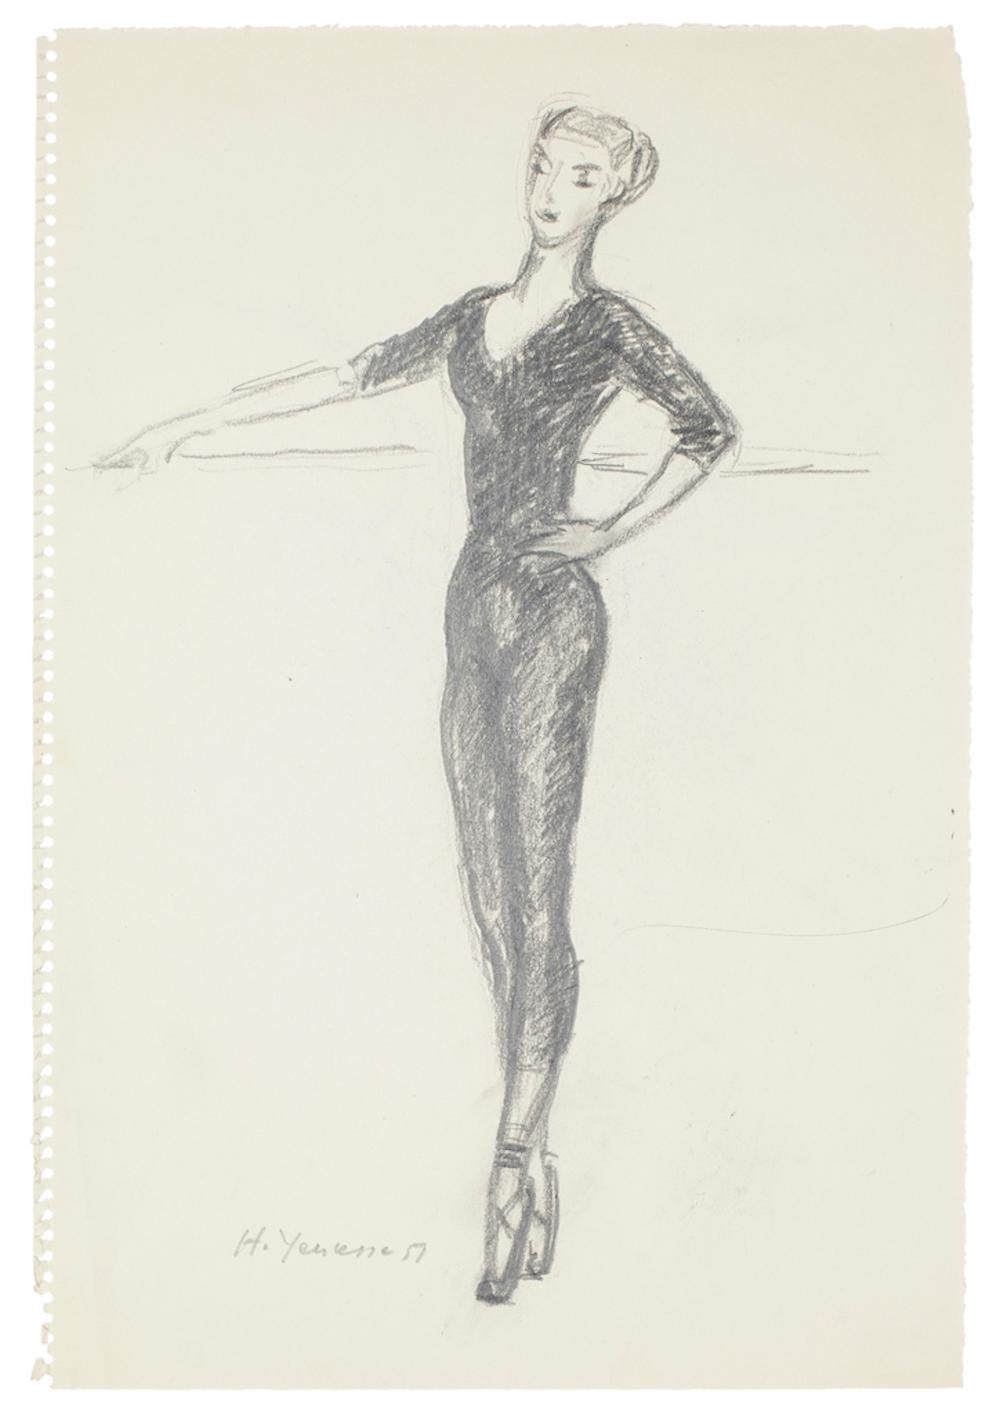 Ballet Dancers - Set of 15 Pencil and Charcoal Drawings by H. Yencesse - 1951 2